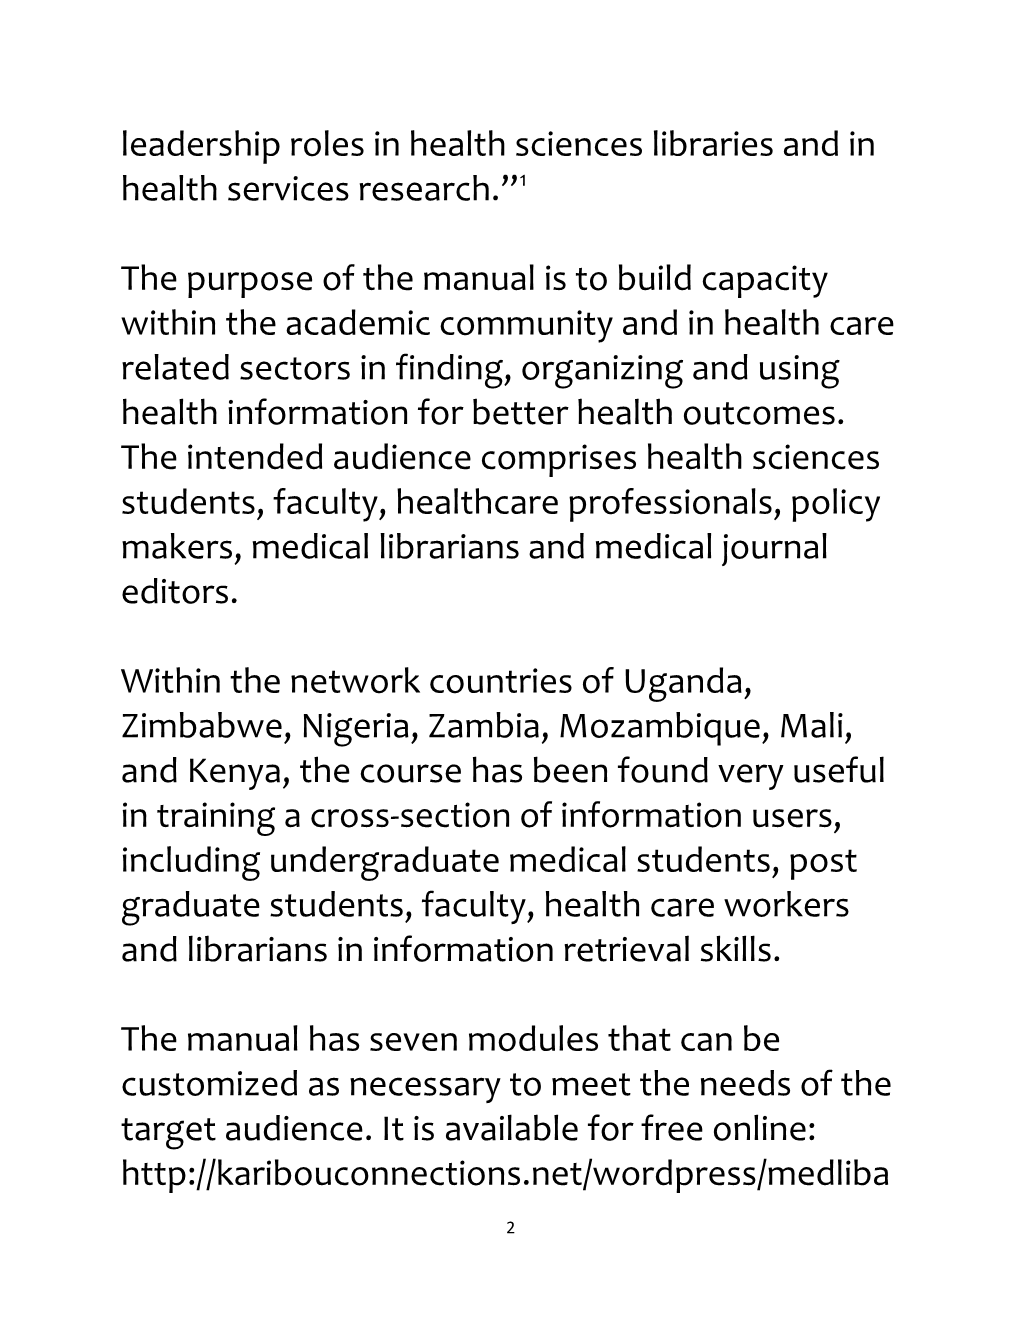 Improving Knowledge and Skills in Accessing Health Information in Africa